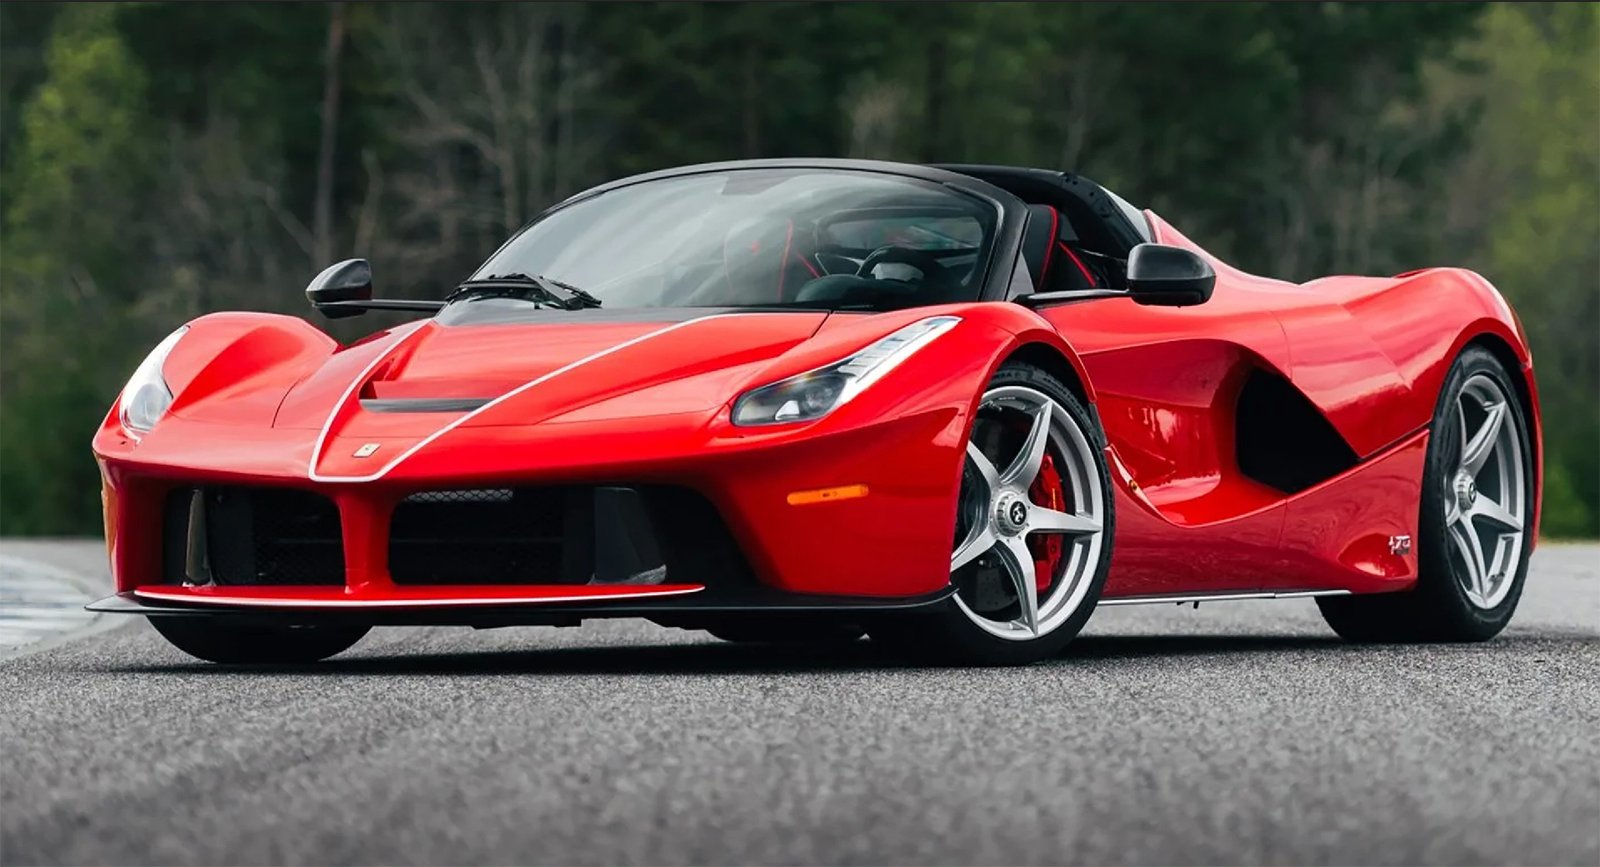 Top 10 Luxury Cars in Canada: A Symphony of Opulence and Performance